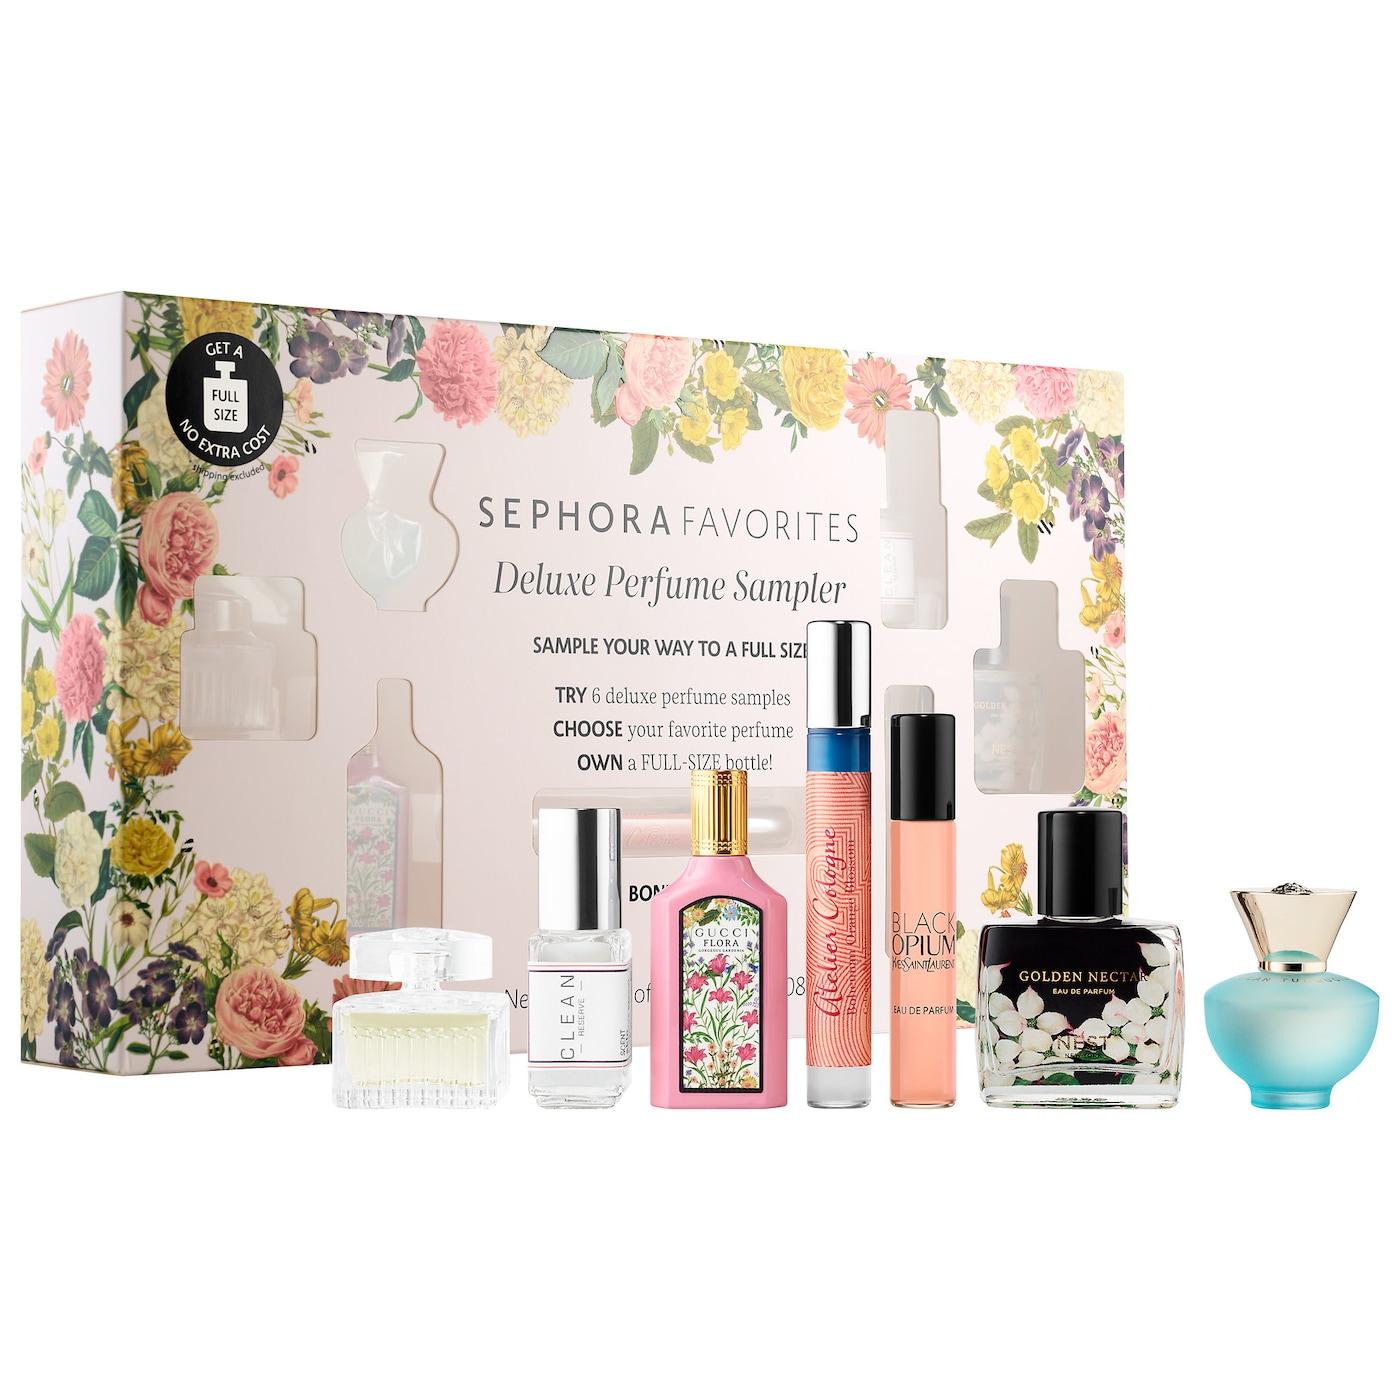 Sephora Favorites Deluxe Perfume Sampler Set – Now Available